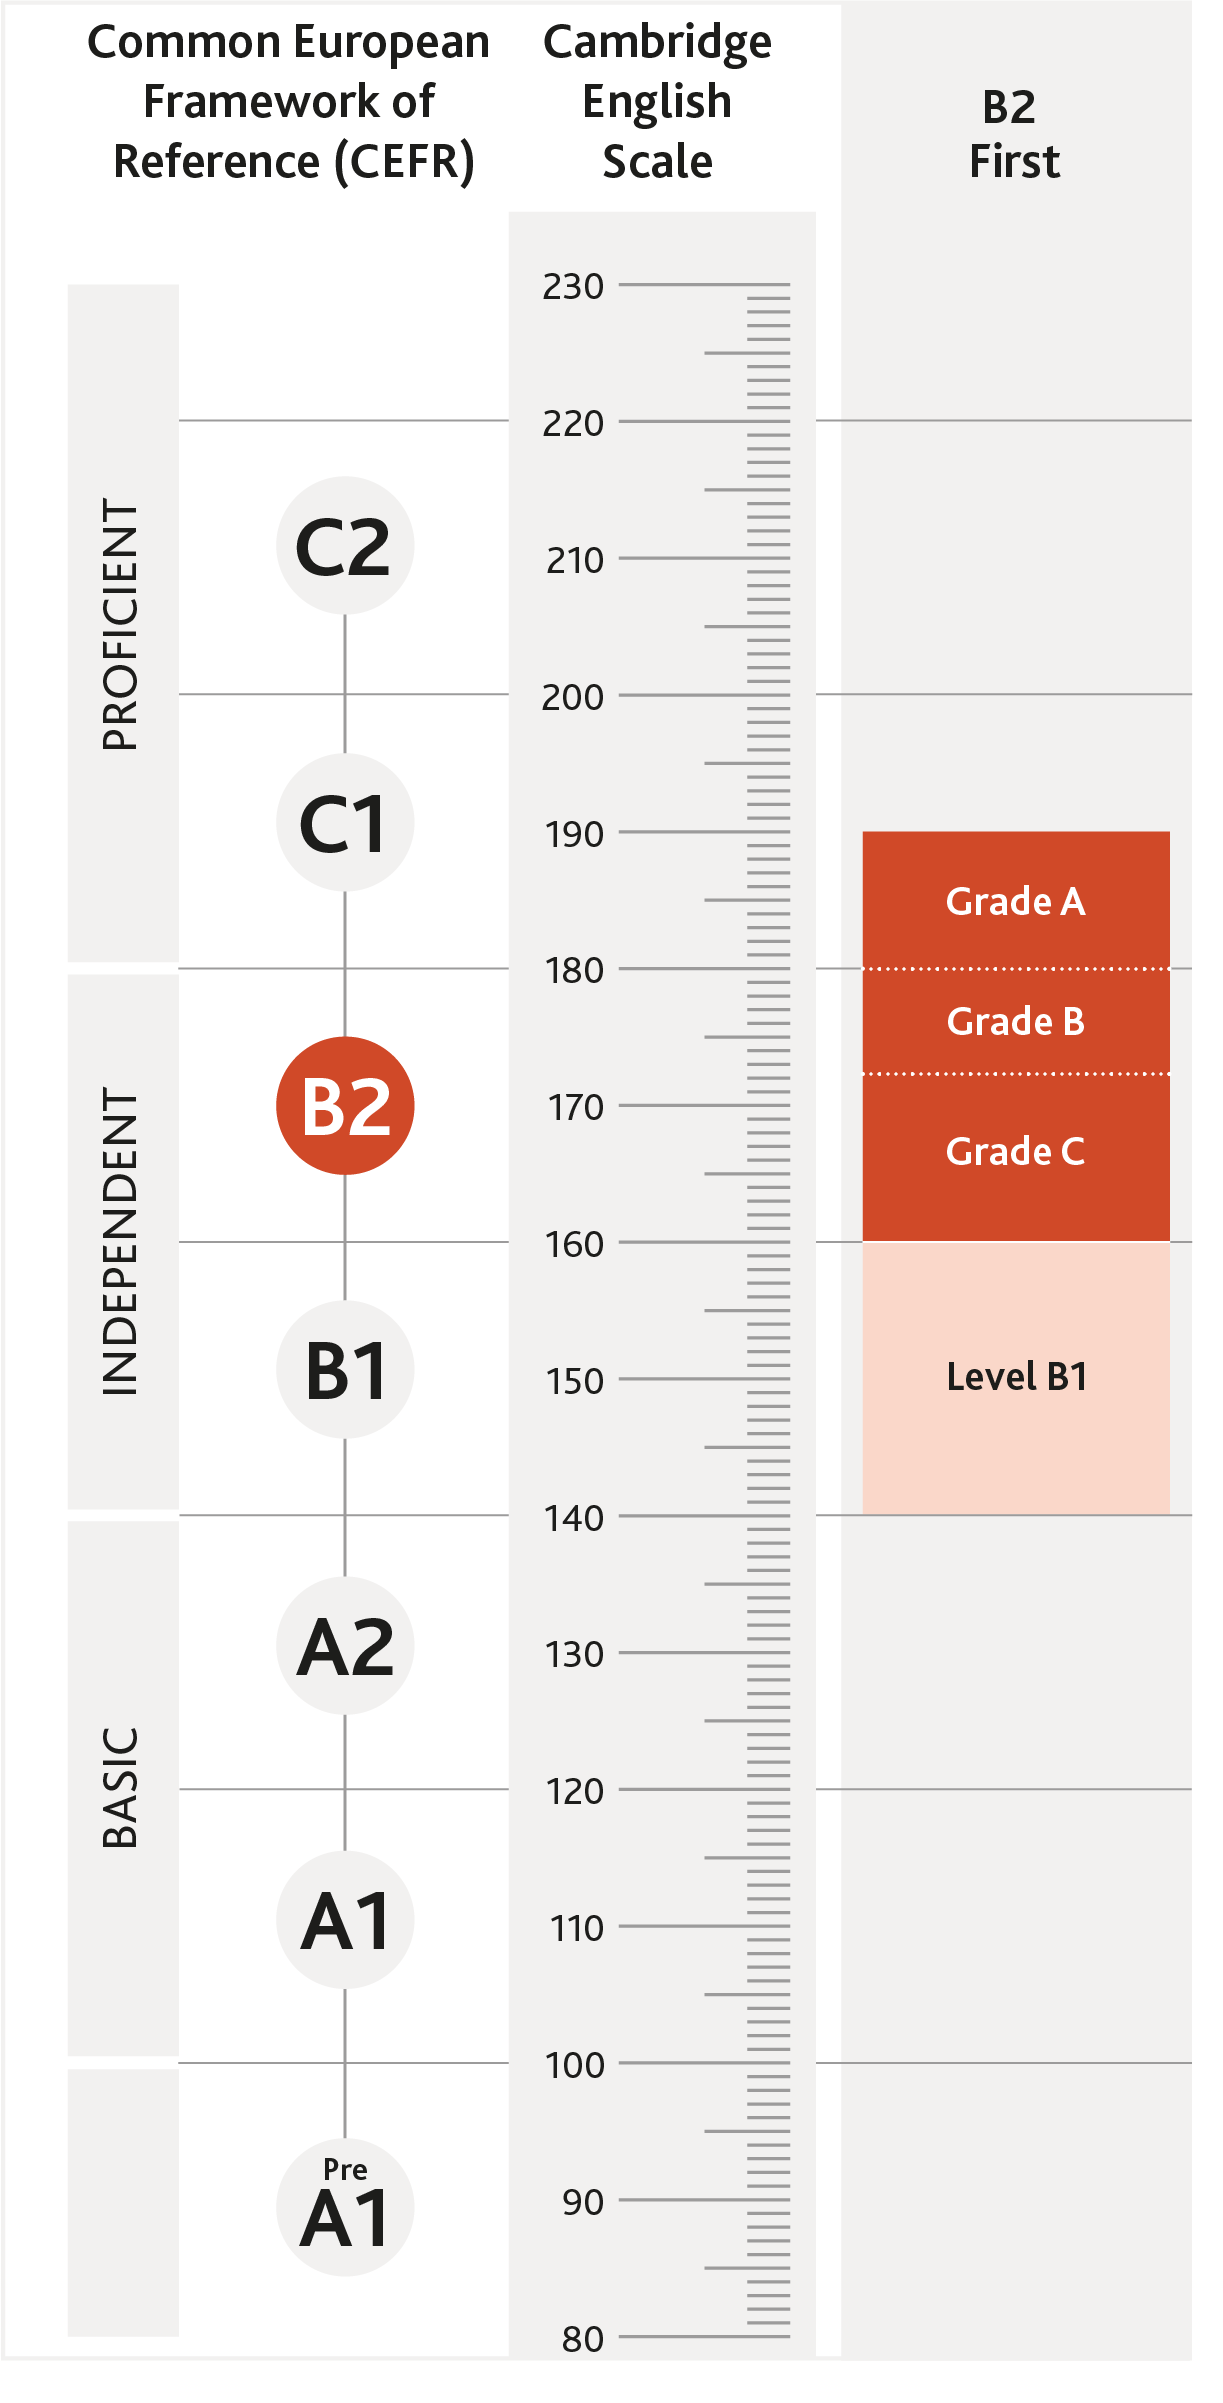 Diagram of where B2 First is aligned on the CEFR and Cambridge English Scale